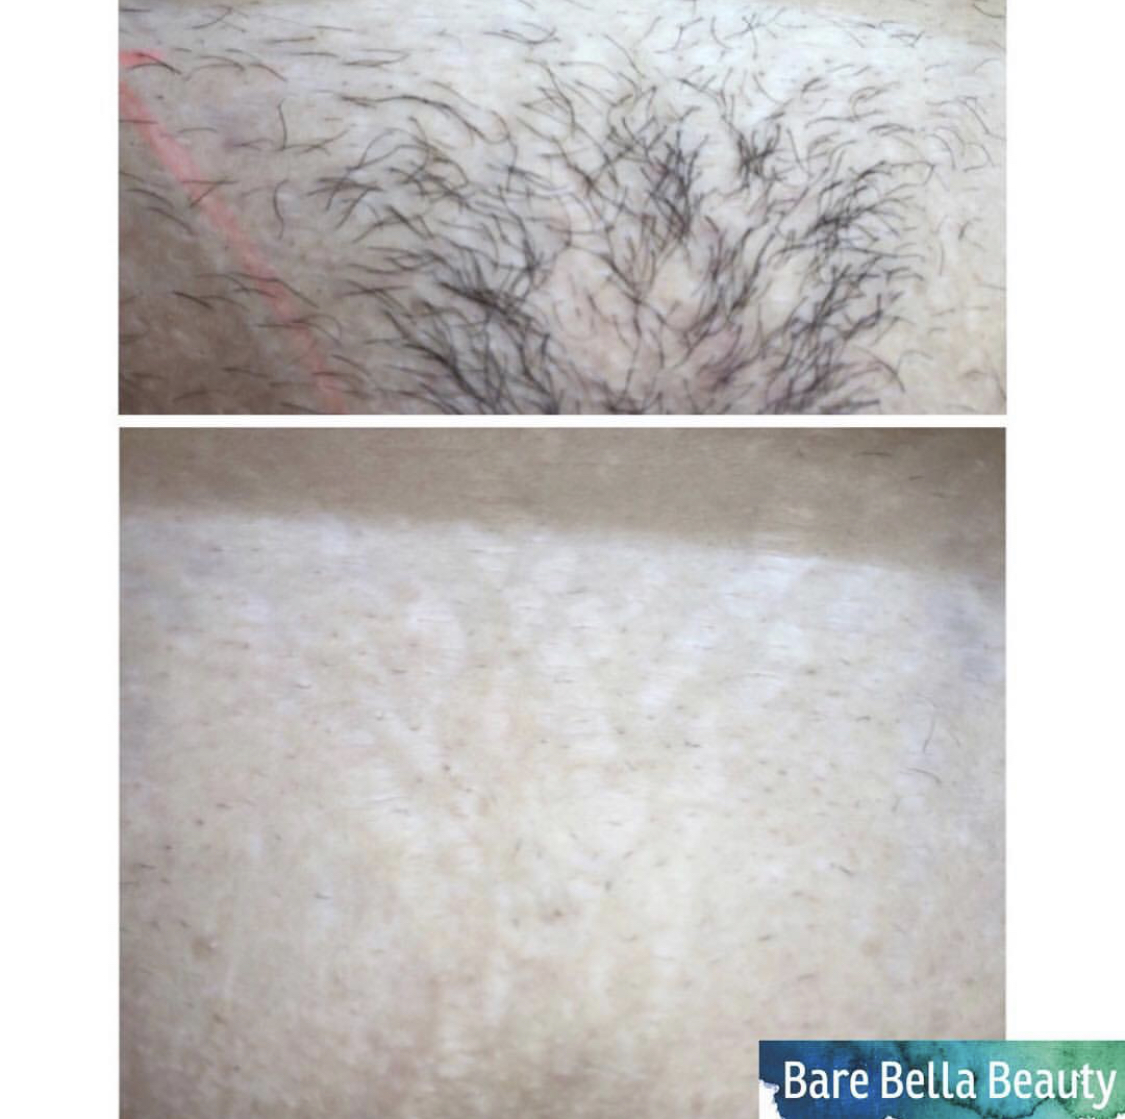 My laser hair removal did not work – Barebella Beauty